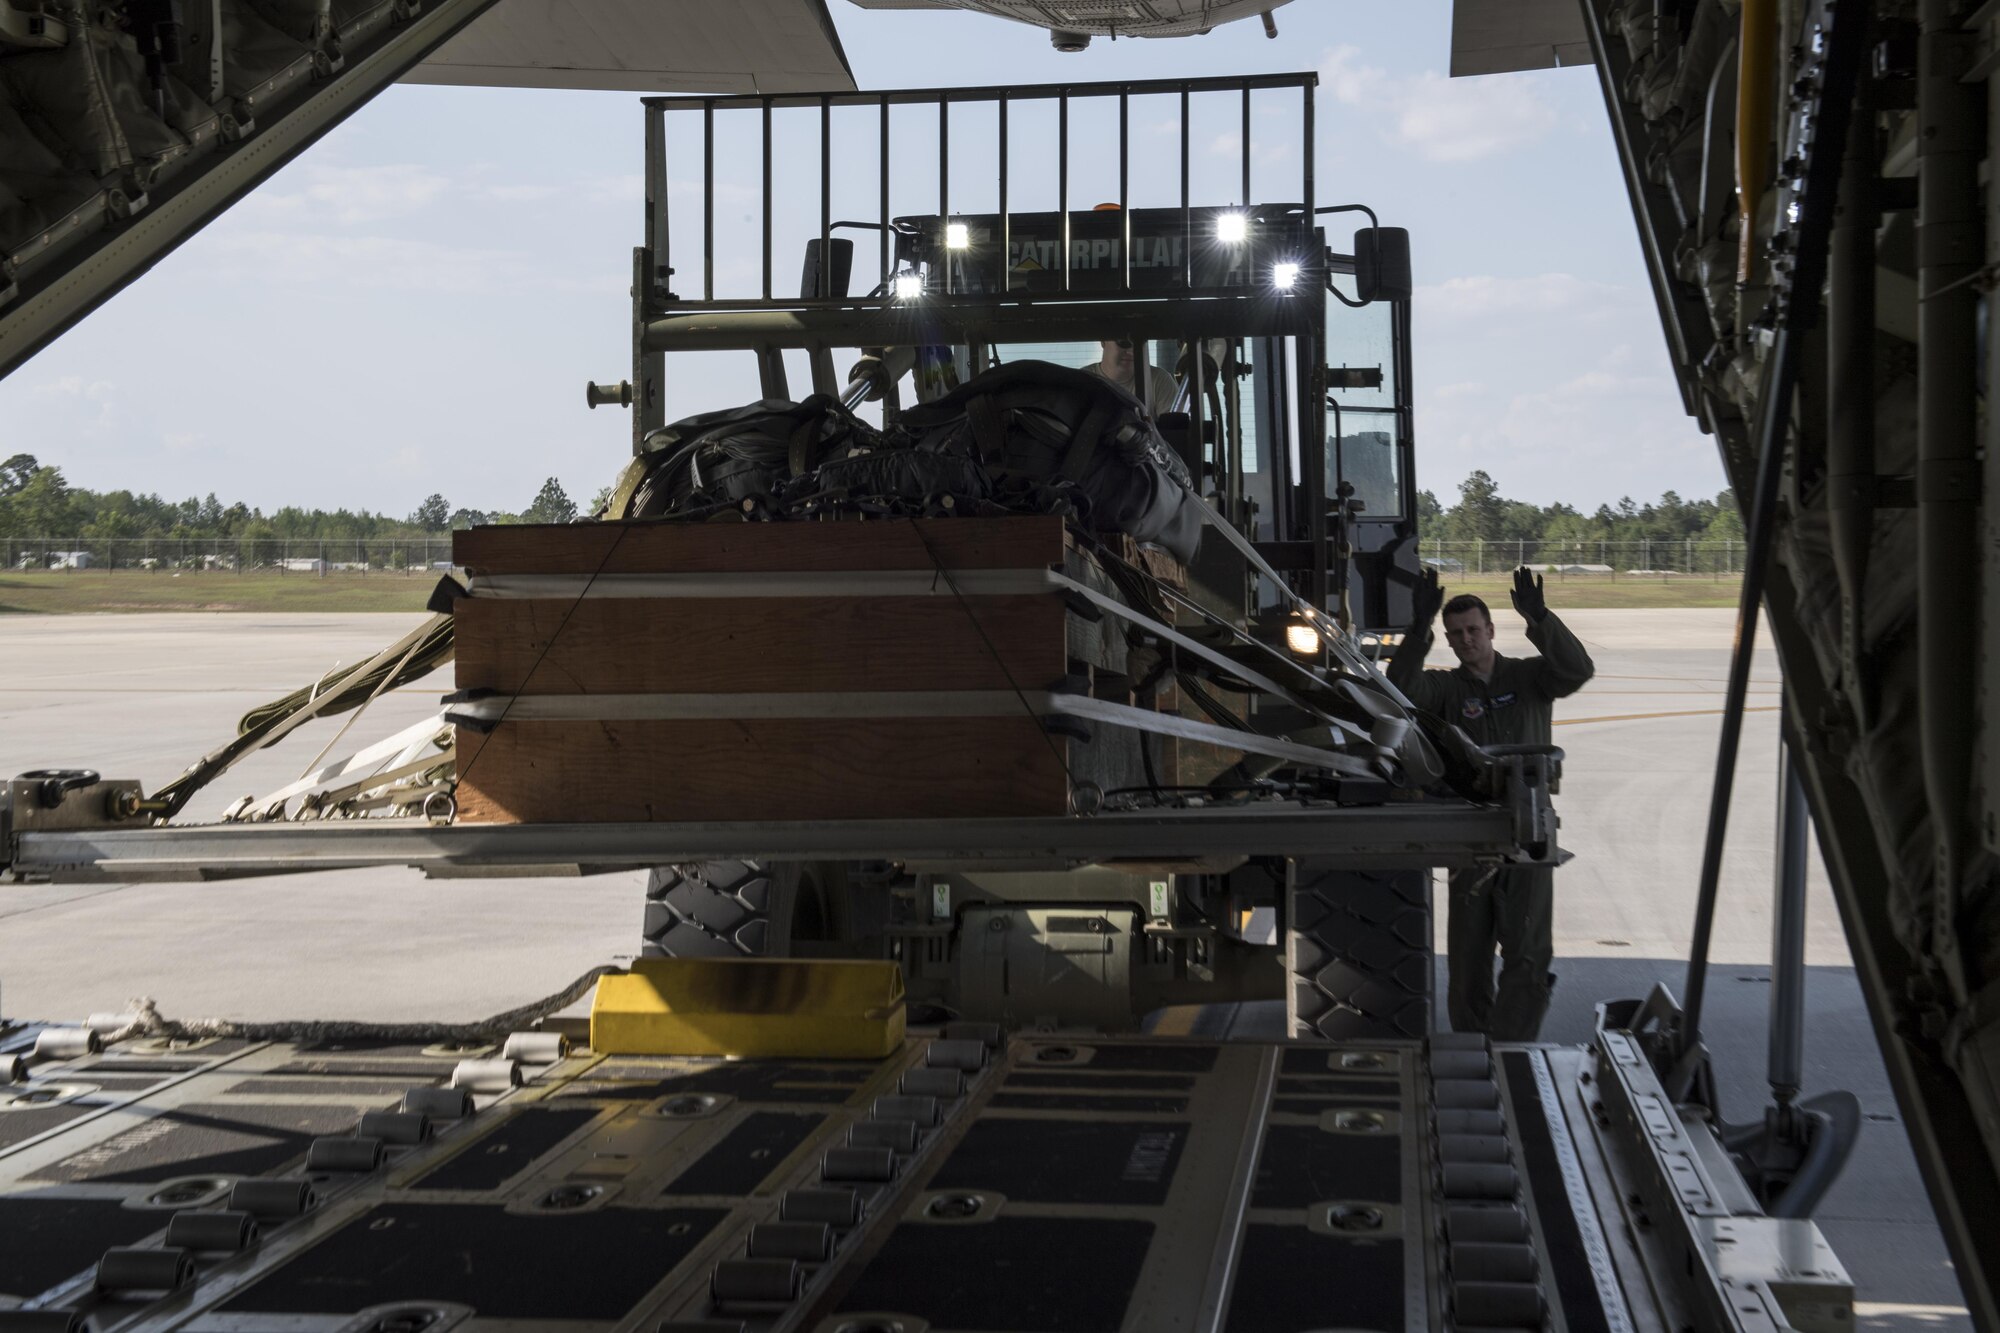 Staff Sgt. Josh Noethe, 71st Rescue Squadron loadmaster, guides a training bundle into the back of an HC-130J Combat King II, April 18, 2017, at Moody Air Force Base, Ga. The training bundle weighed approximately 3,000 pounds and is designed to simulate a heavy equipment air drop. This training helps the 71st RQS remain ready to provide rapidly deployable, expeditionary personnel recovery forces to theater commanders for contingency response operations worldwide. (U.S. Air Force photo by Tech. Sgt. Zachary Wolf)